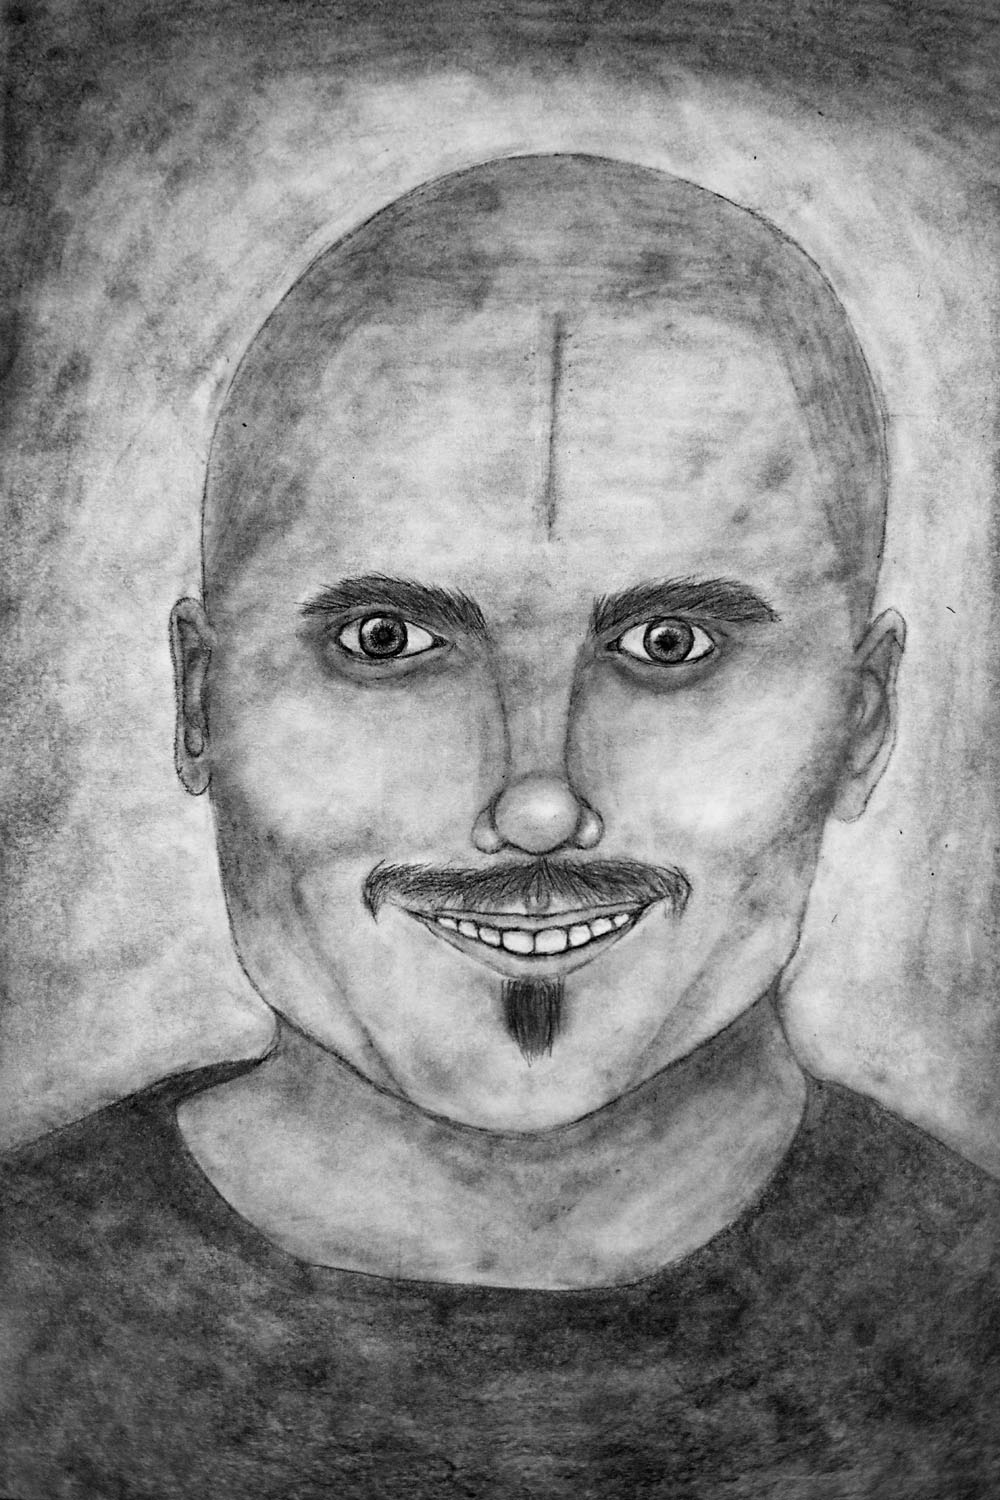 Pencil drawing of man with a bald head